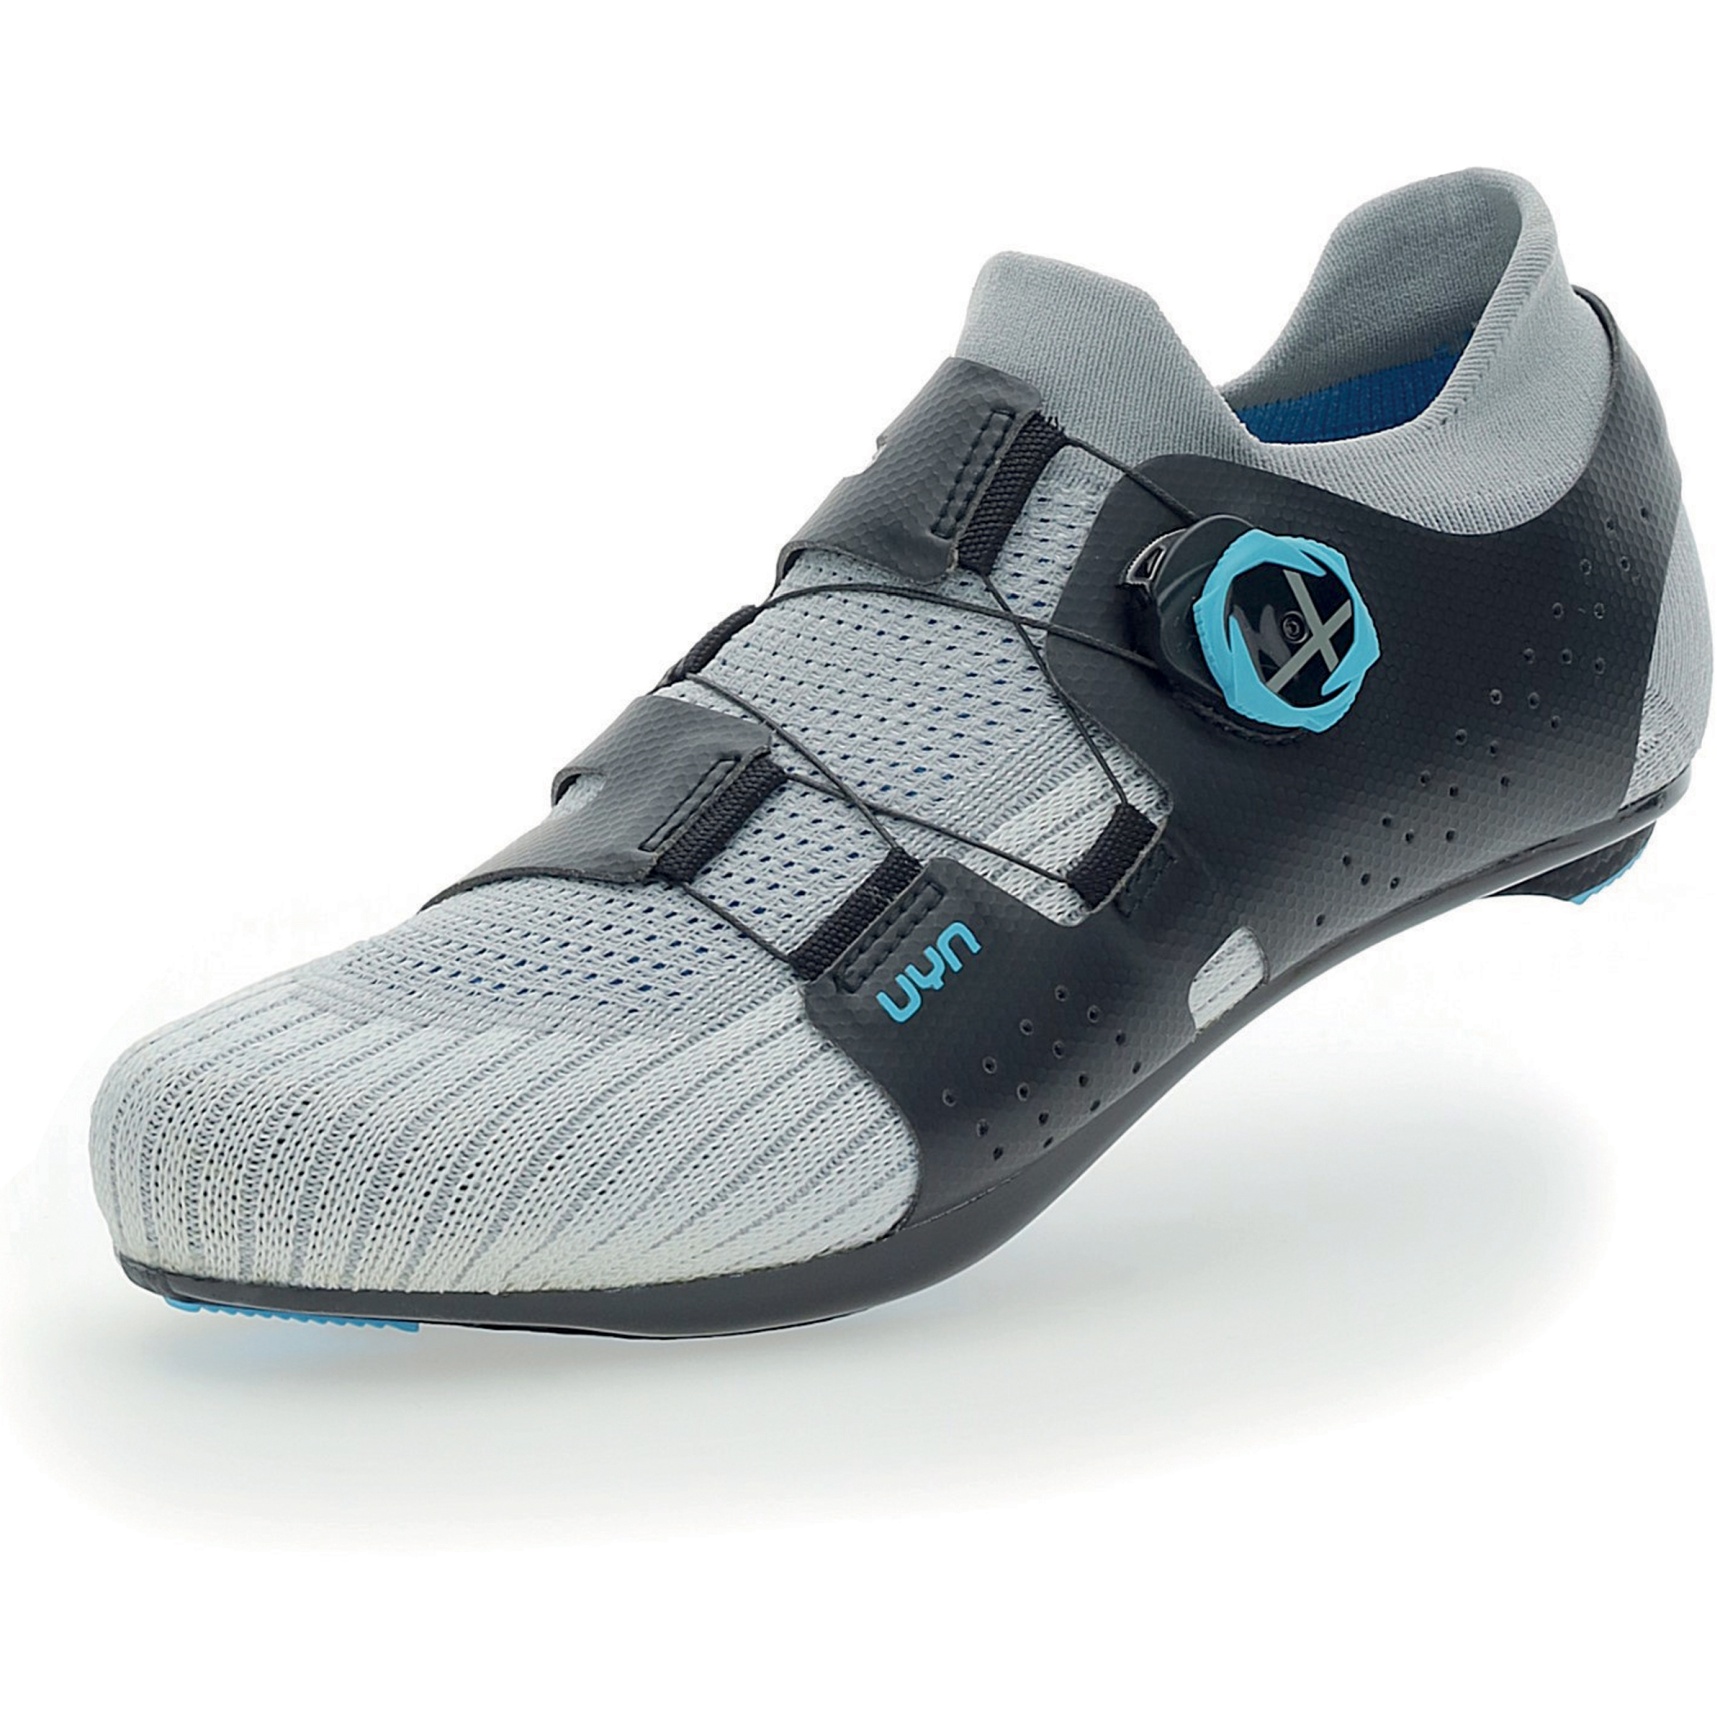 Picture of UYN Naked Full-Carbon Road Bike Shoes - Silver/Blue